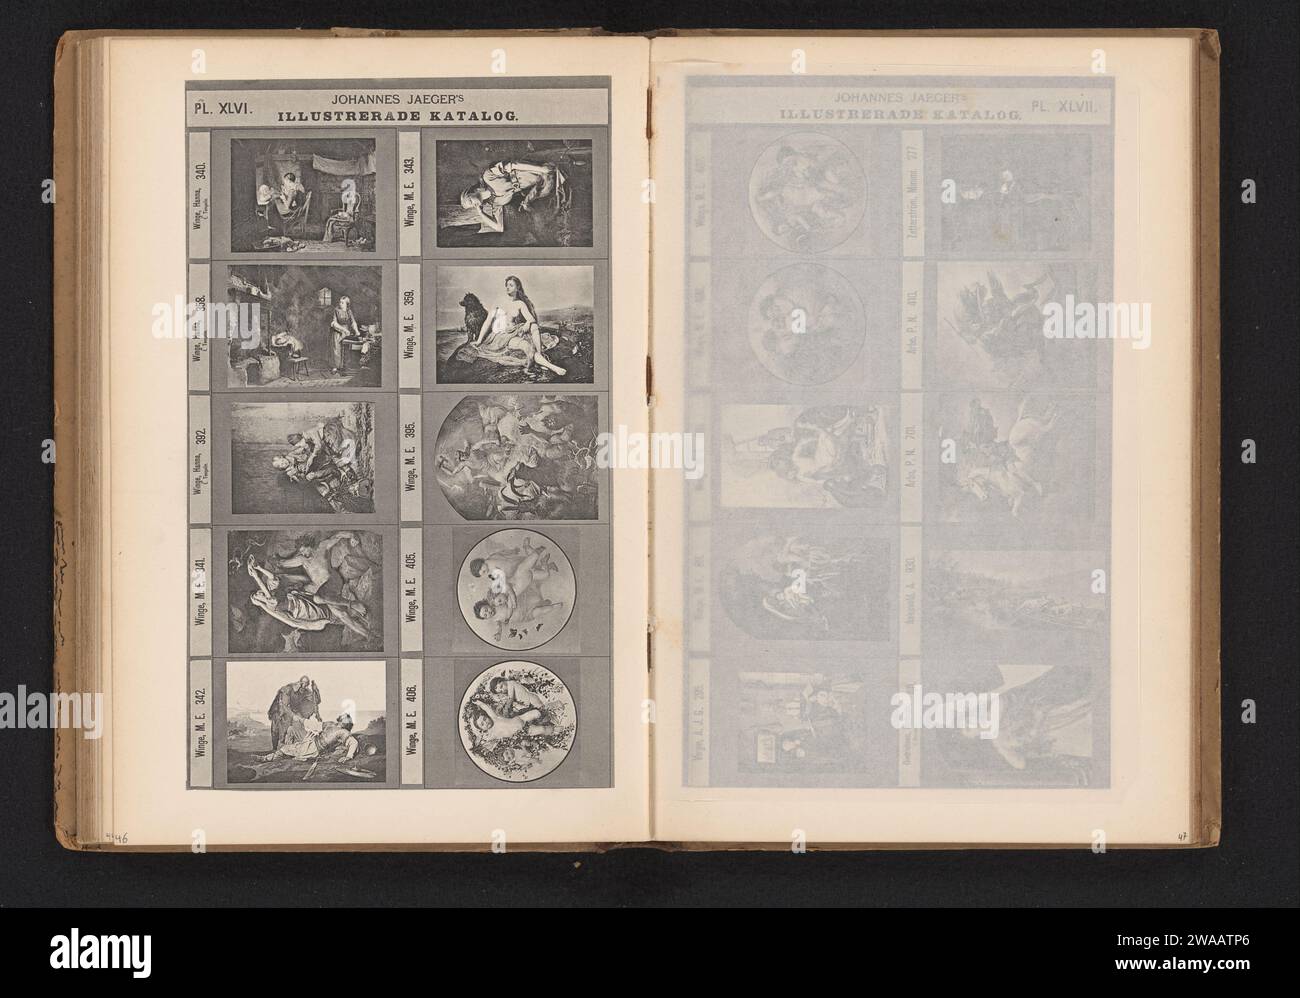 Photo production of ten paintings with mainly mythological scenes, Johannes Jaeger, After Mårten Eskil Winge, c. 1872 - c. 1882 photomechanical print  Stockholm paper collotype picture, painting. Classical Mythology and Ancient History Stock Photo